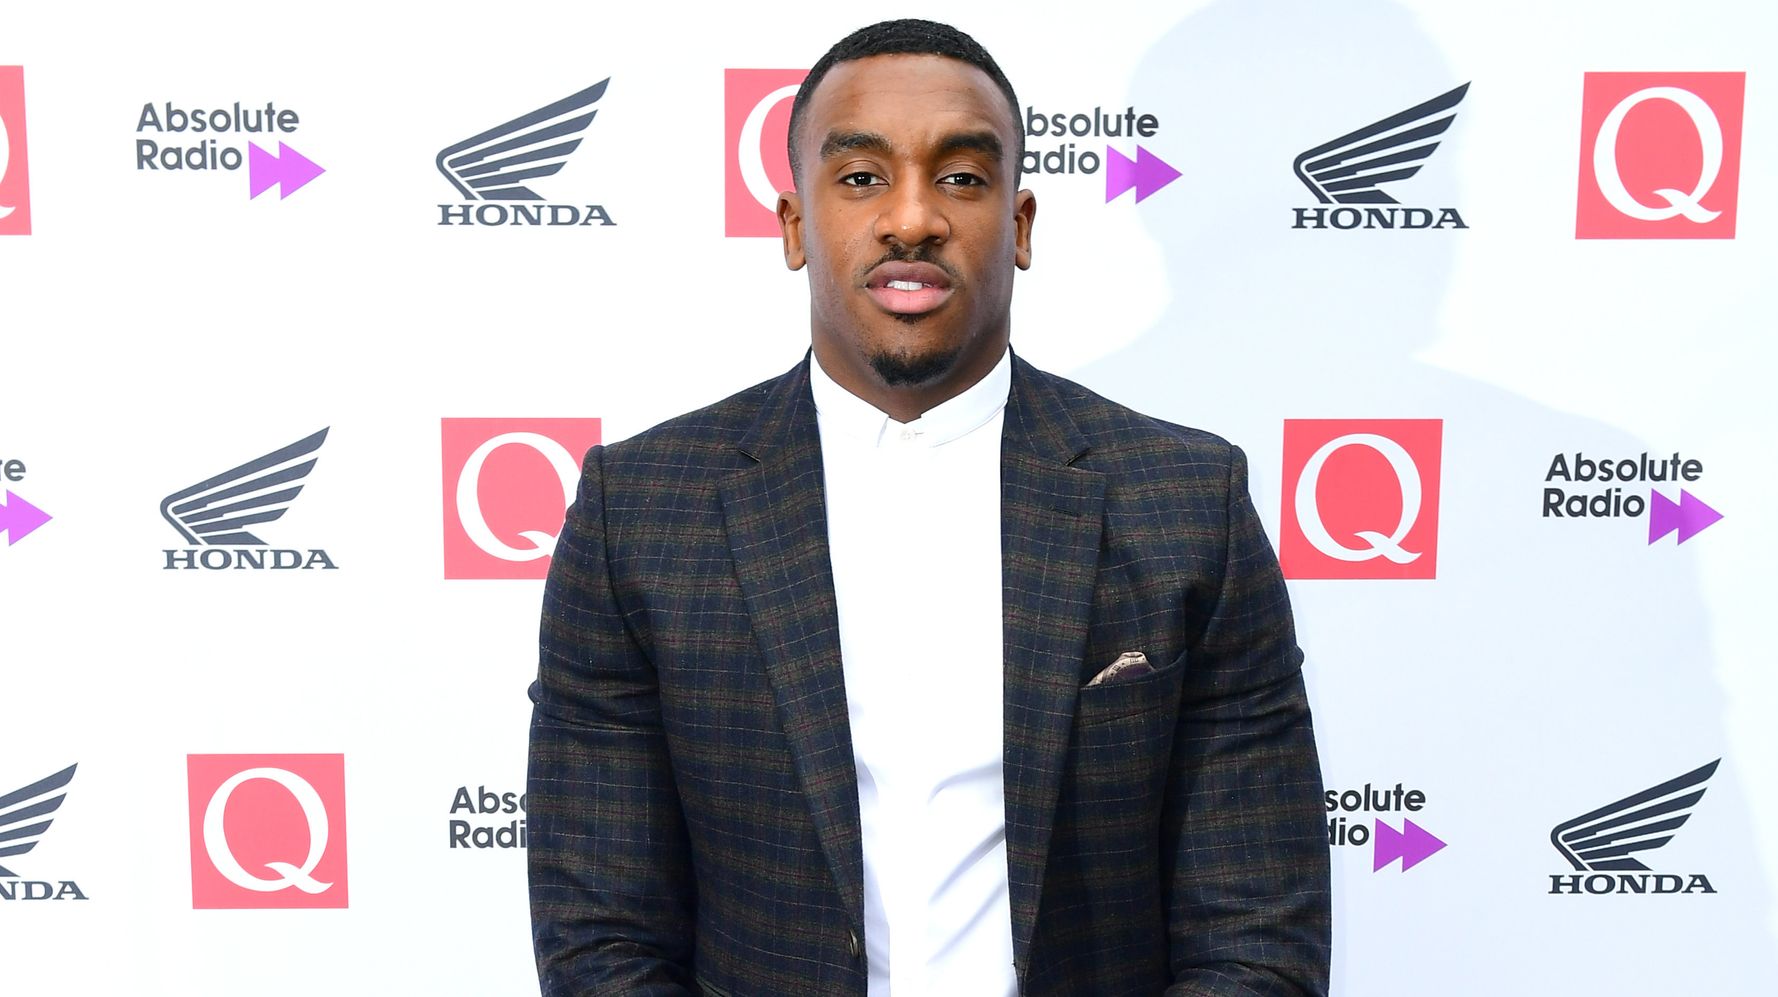 Mum finds missing son after spotting him in Bugzy Malone video